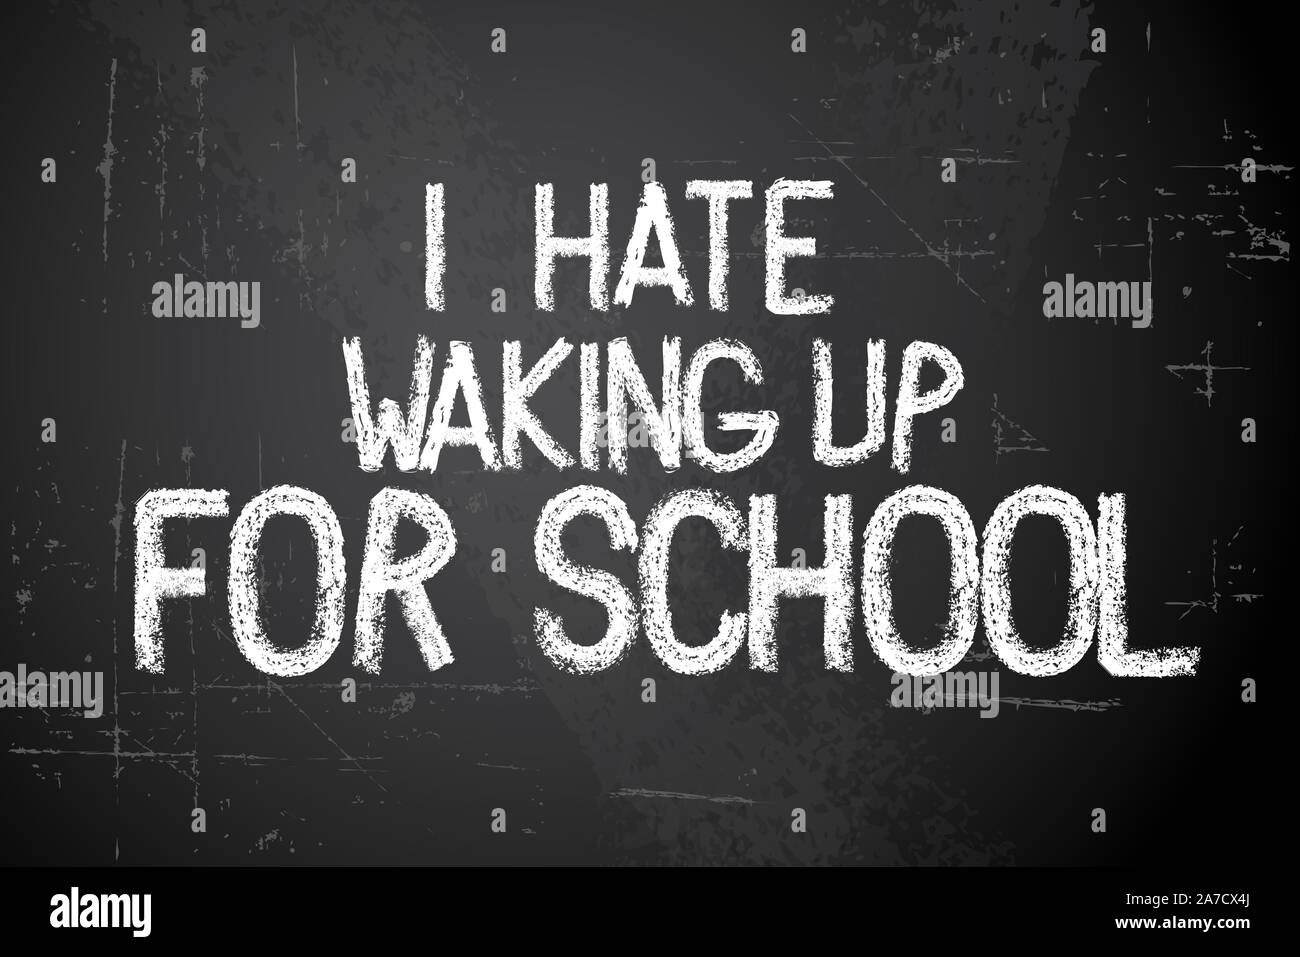 Back to school vector white illustration on chalkboard saying I hate waking up for school Stock Vector